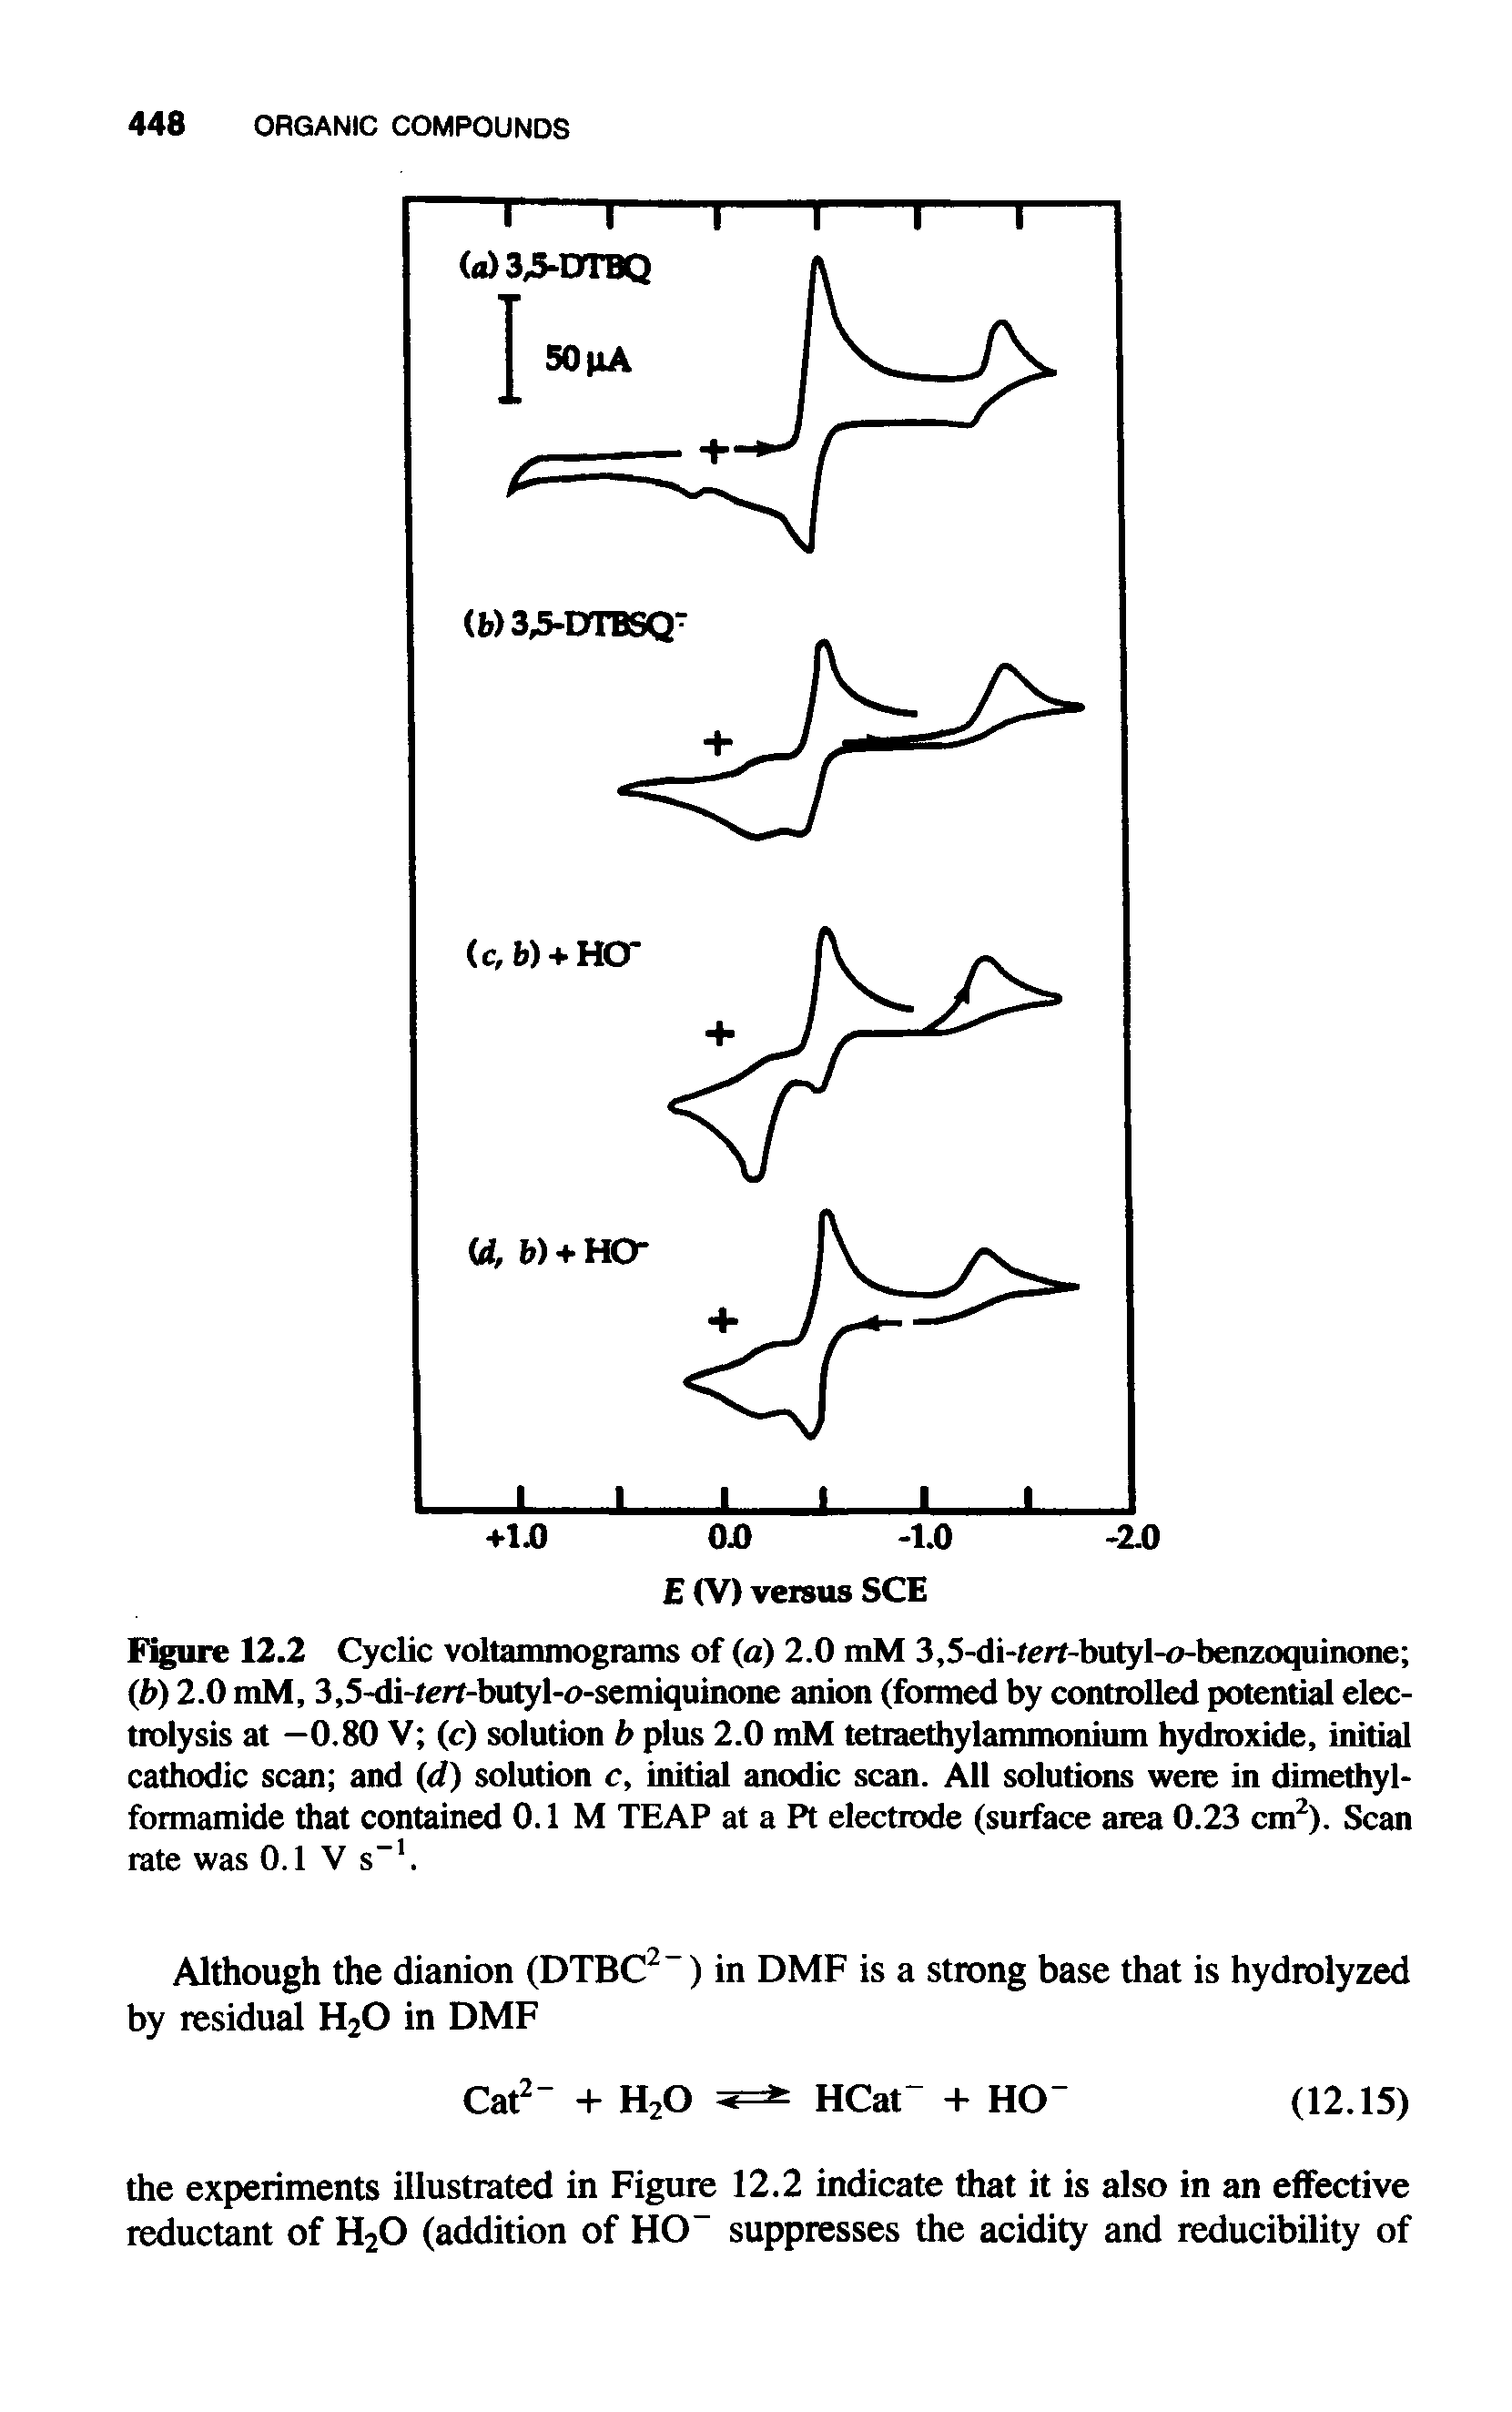 Figure 12.2 Cyclic voltammograms of (a) 2.0 mM 3,5-di-rert-butyl-o-benzoquinone (b) 2.0 mM, 3,5-di-ferf-butyl-o-semiquinone anion (formed by controlled potential electrolysis at —0.80 V (c) solution b plus 2.0 mM tetraethylammonium hydroxide, initial cathodic scan and (d) solution c, initial anodic scan. All solutions were in dimethyl-formamide that contained 0.1 M TEAP at a Pt electrode (surface area 0.23 cm2). Scan rate was 0.1 V s-1.